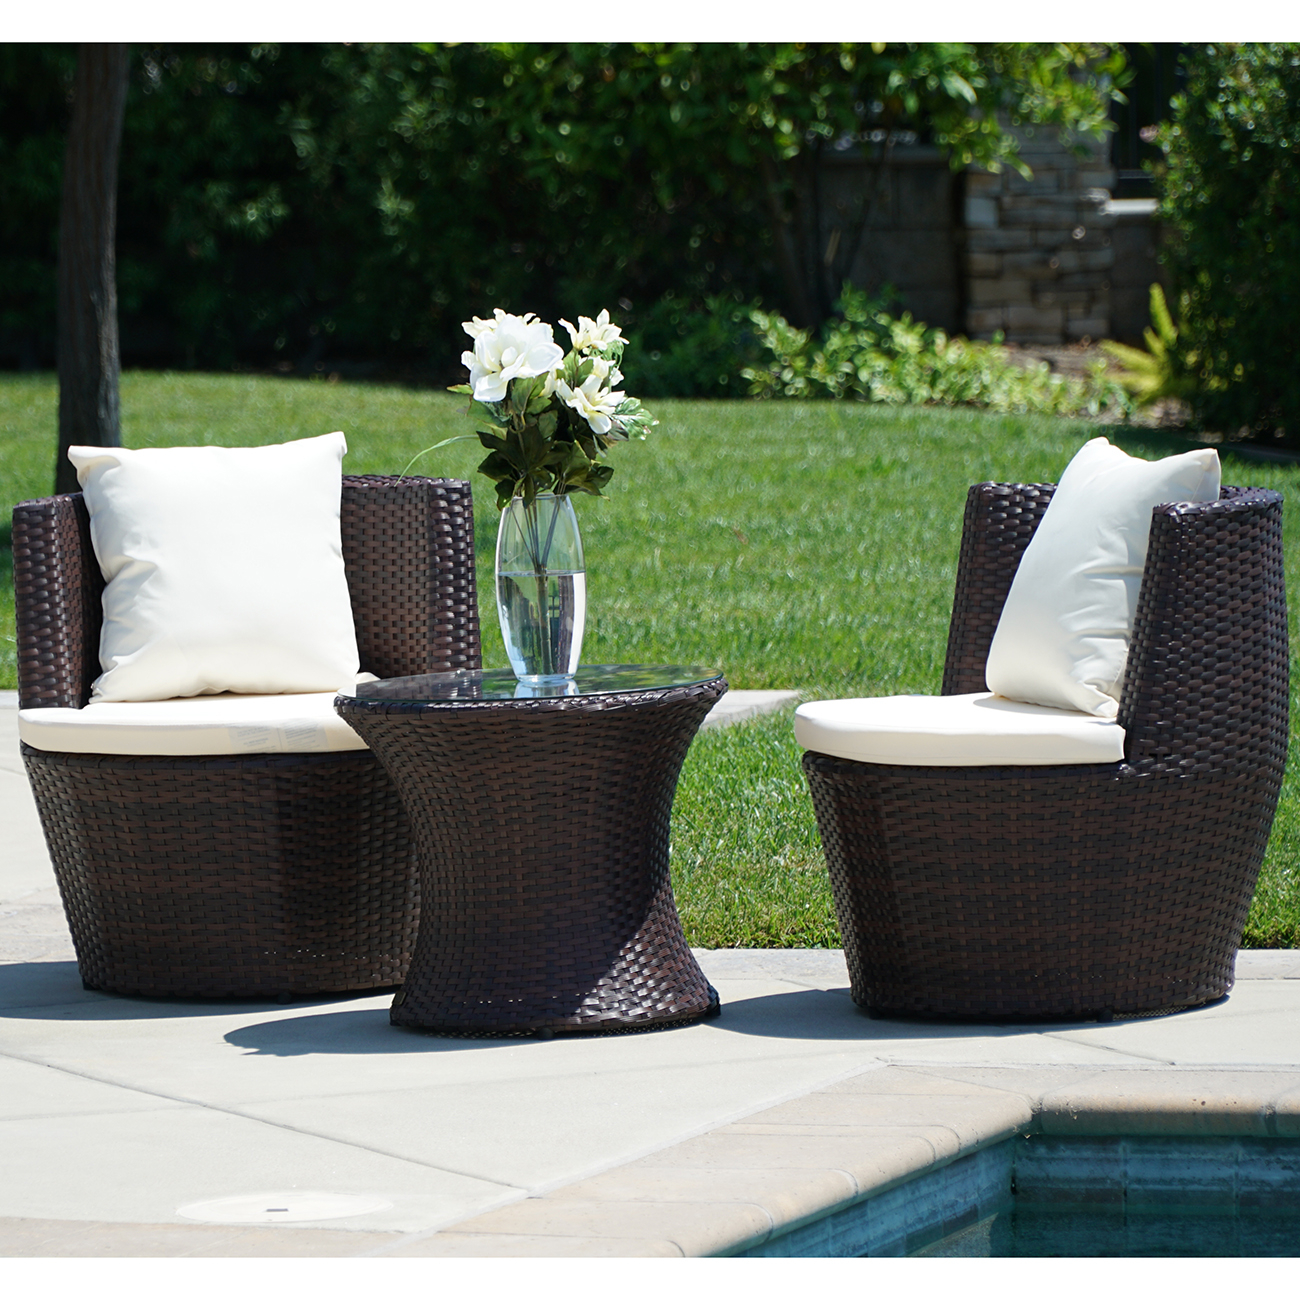 Details About 3 Pc Patio Outdoor Rattan Set Wicker Furniture Glass Table Brown Round Chairs regarding size 1300 X 1300